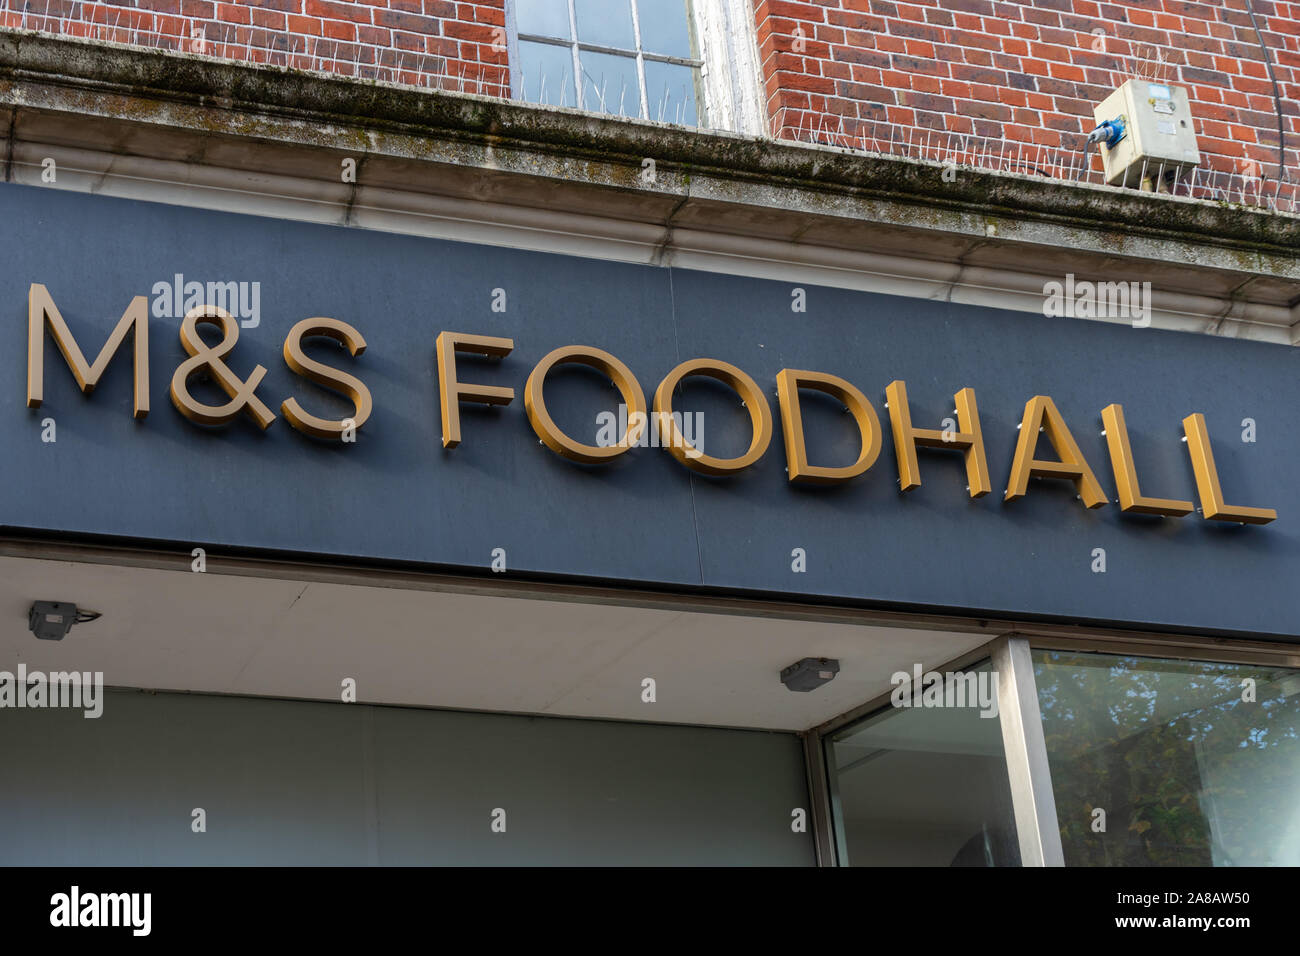 the sign of a M&S Foodhall or marks and spencer foodhall shop store or shop Stock Photo